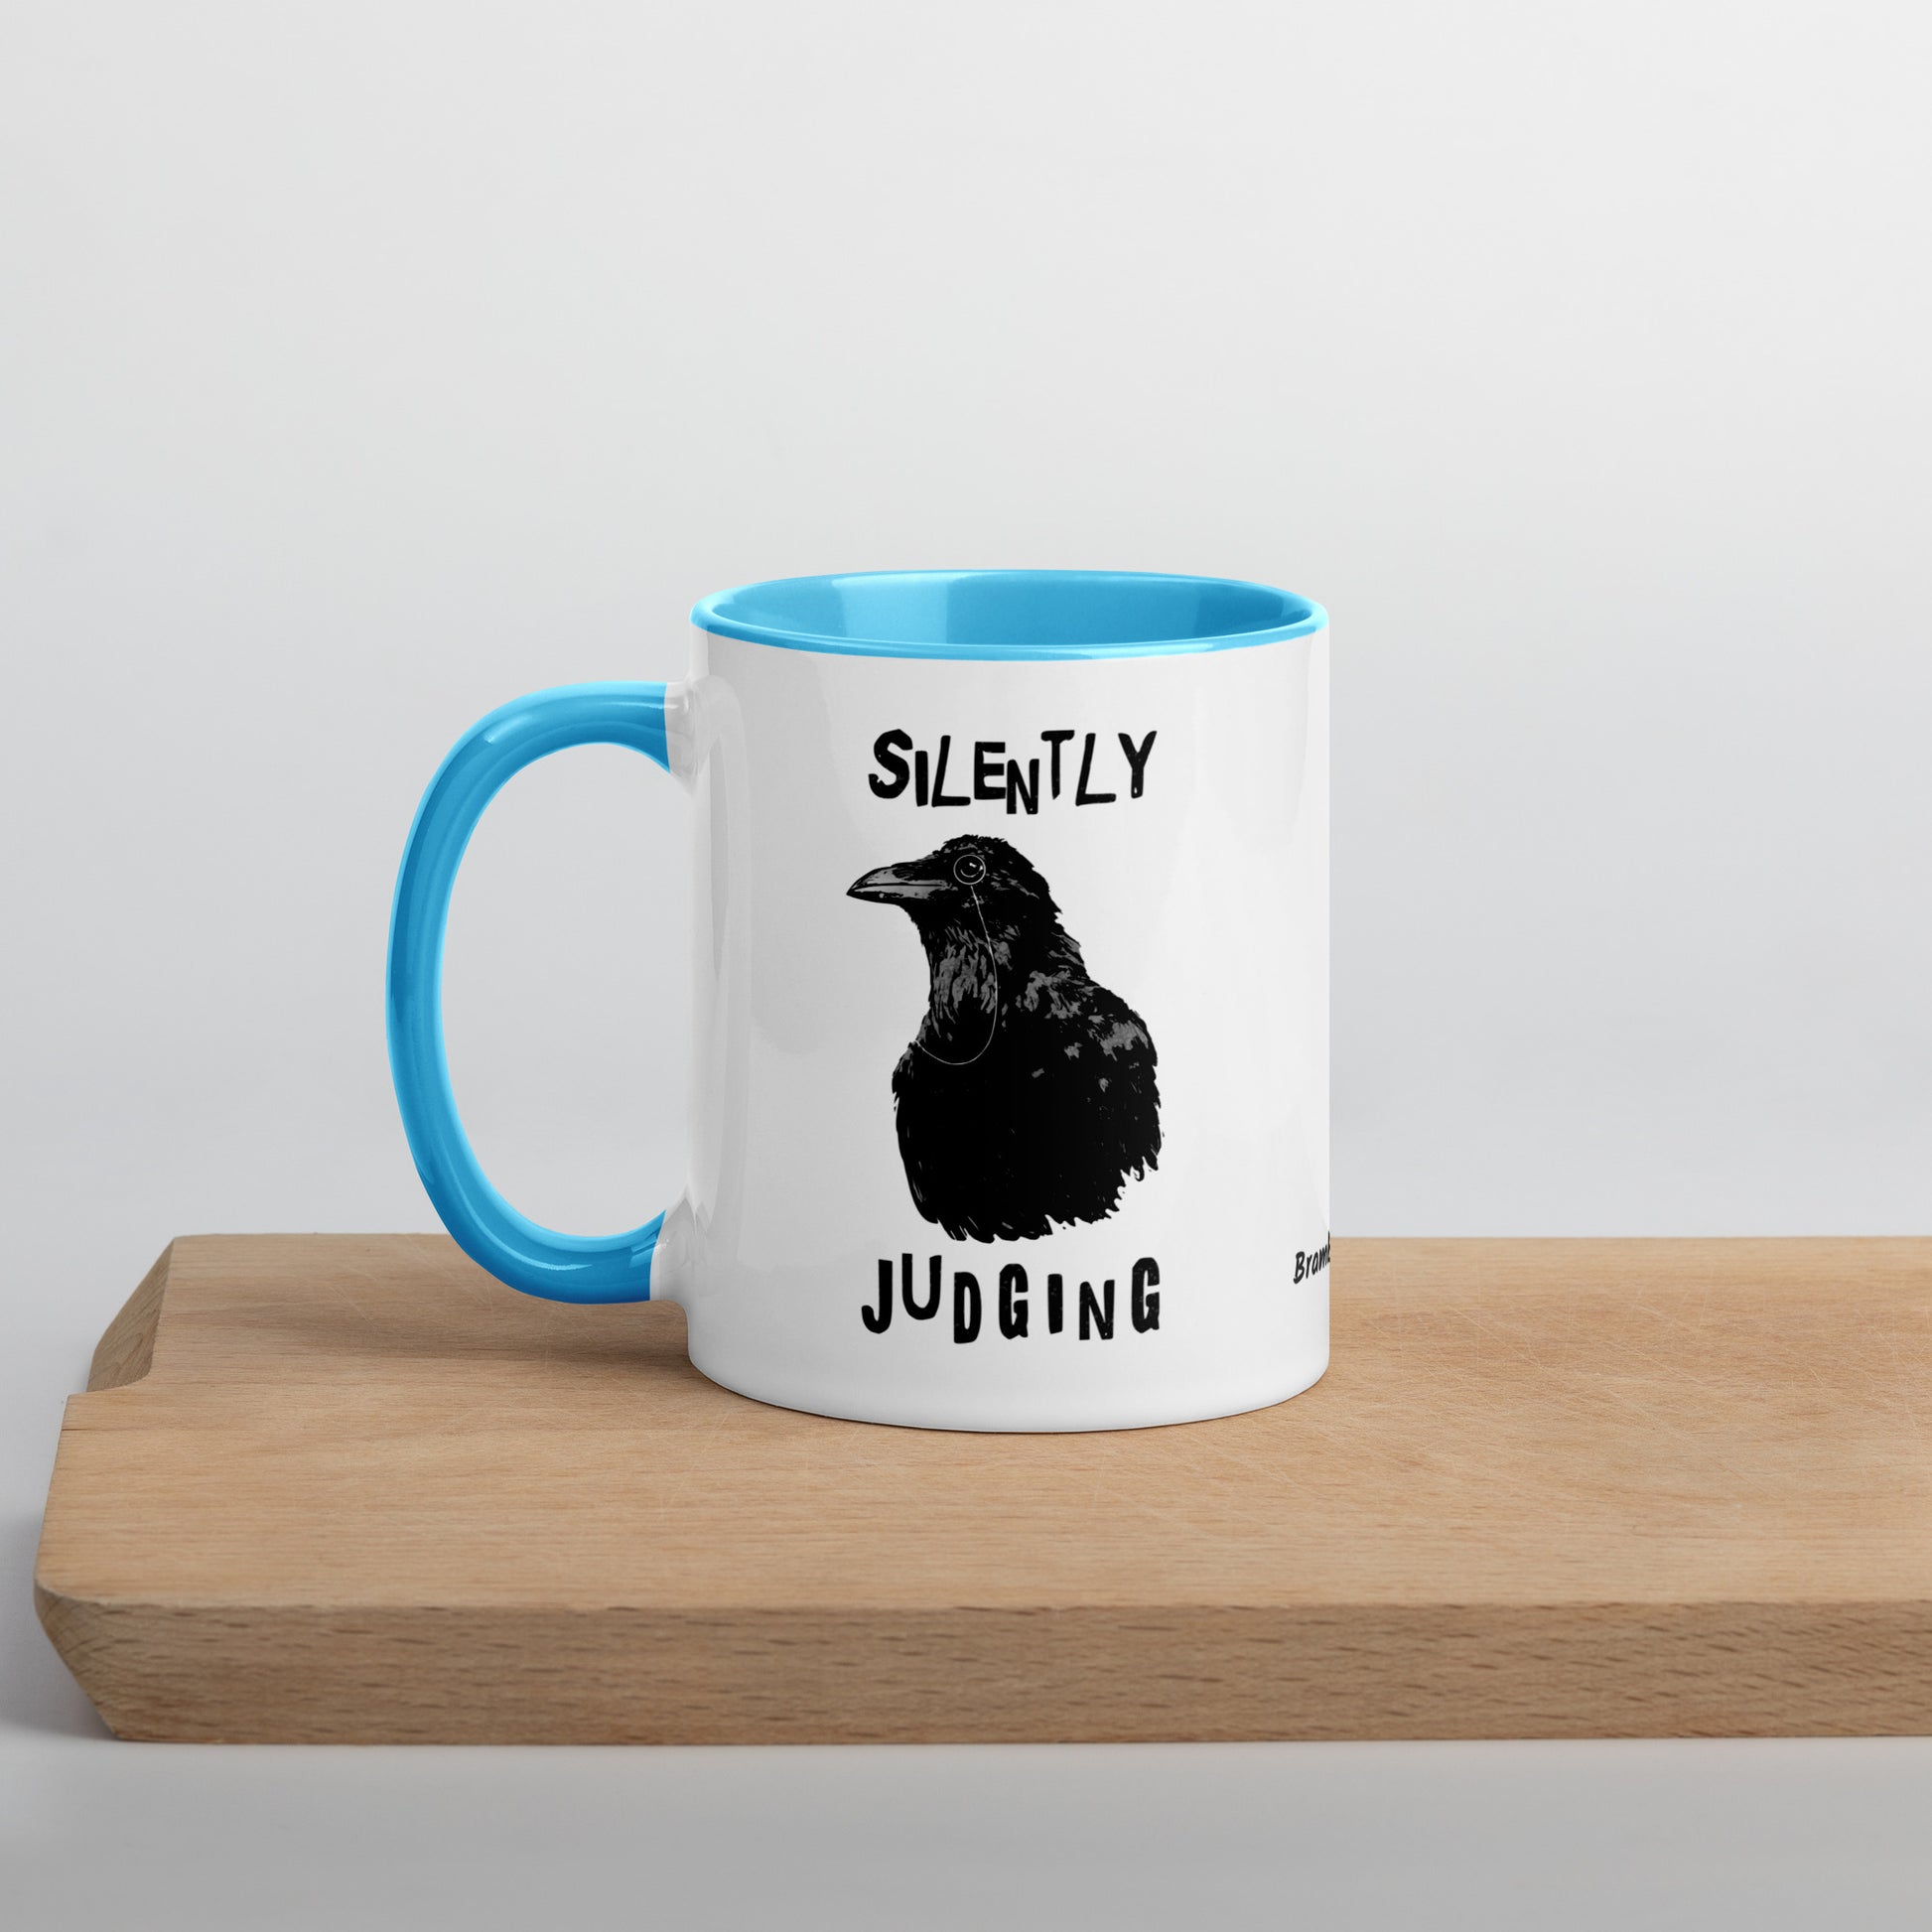 11 ounce ceramic mug with Silently Judging text surrounding a monacle-wearing crow. Double-sided design. Mug has blue rim, handle, and inside. Shown sitting on wooden cutting board.